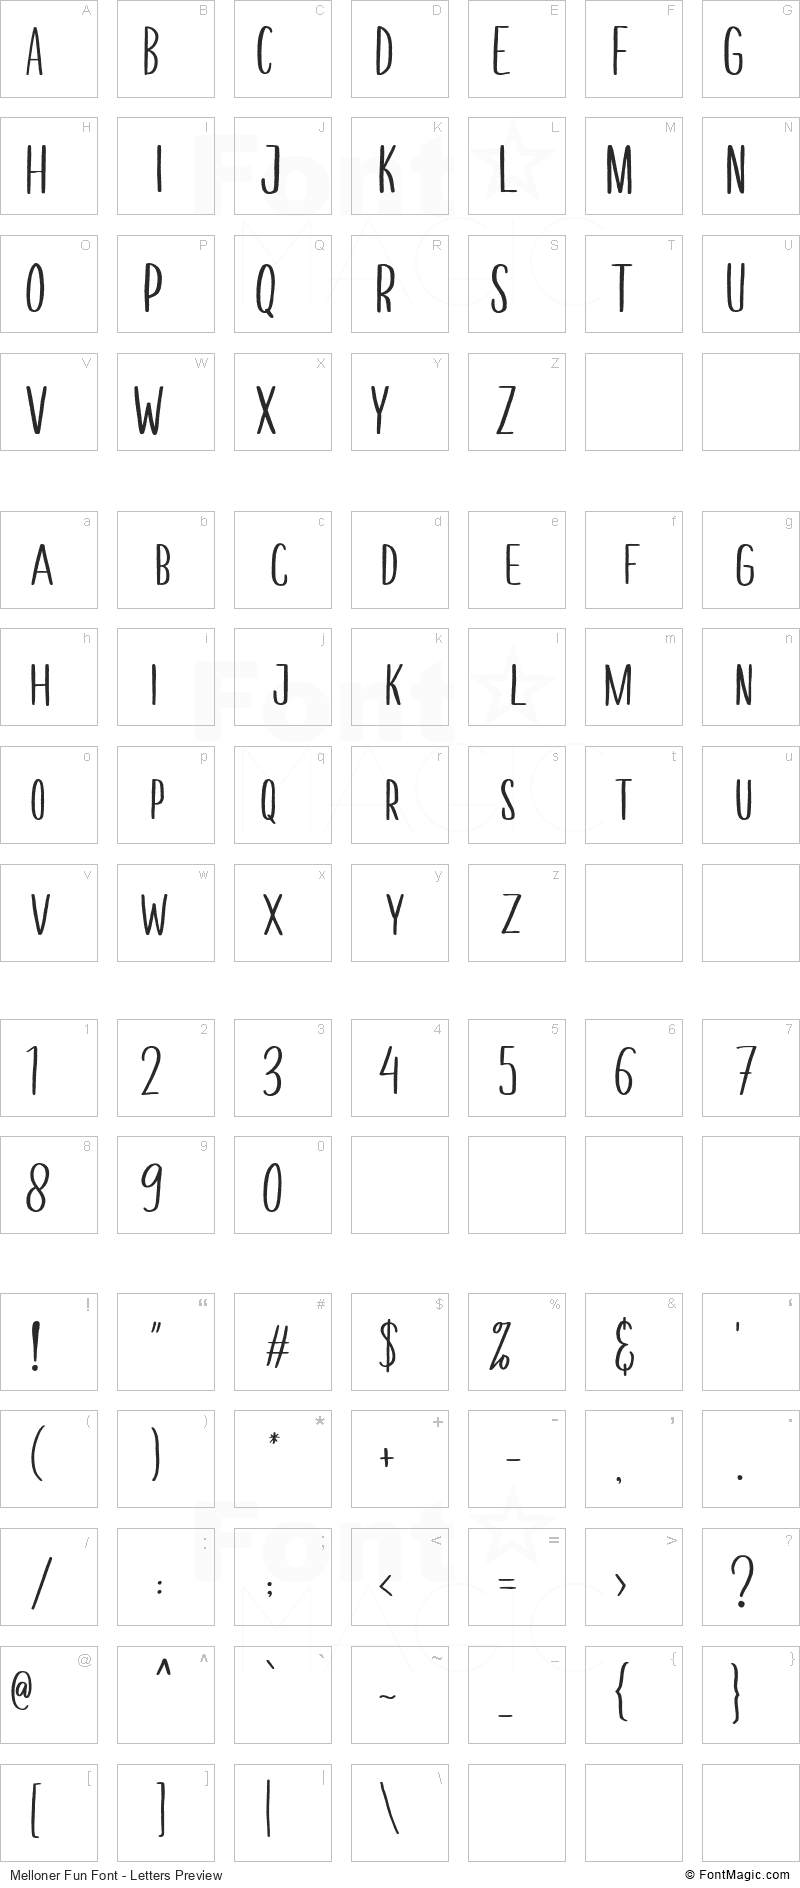 Melloner Fun Font - All Latters Preview Chart